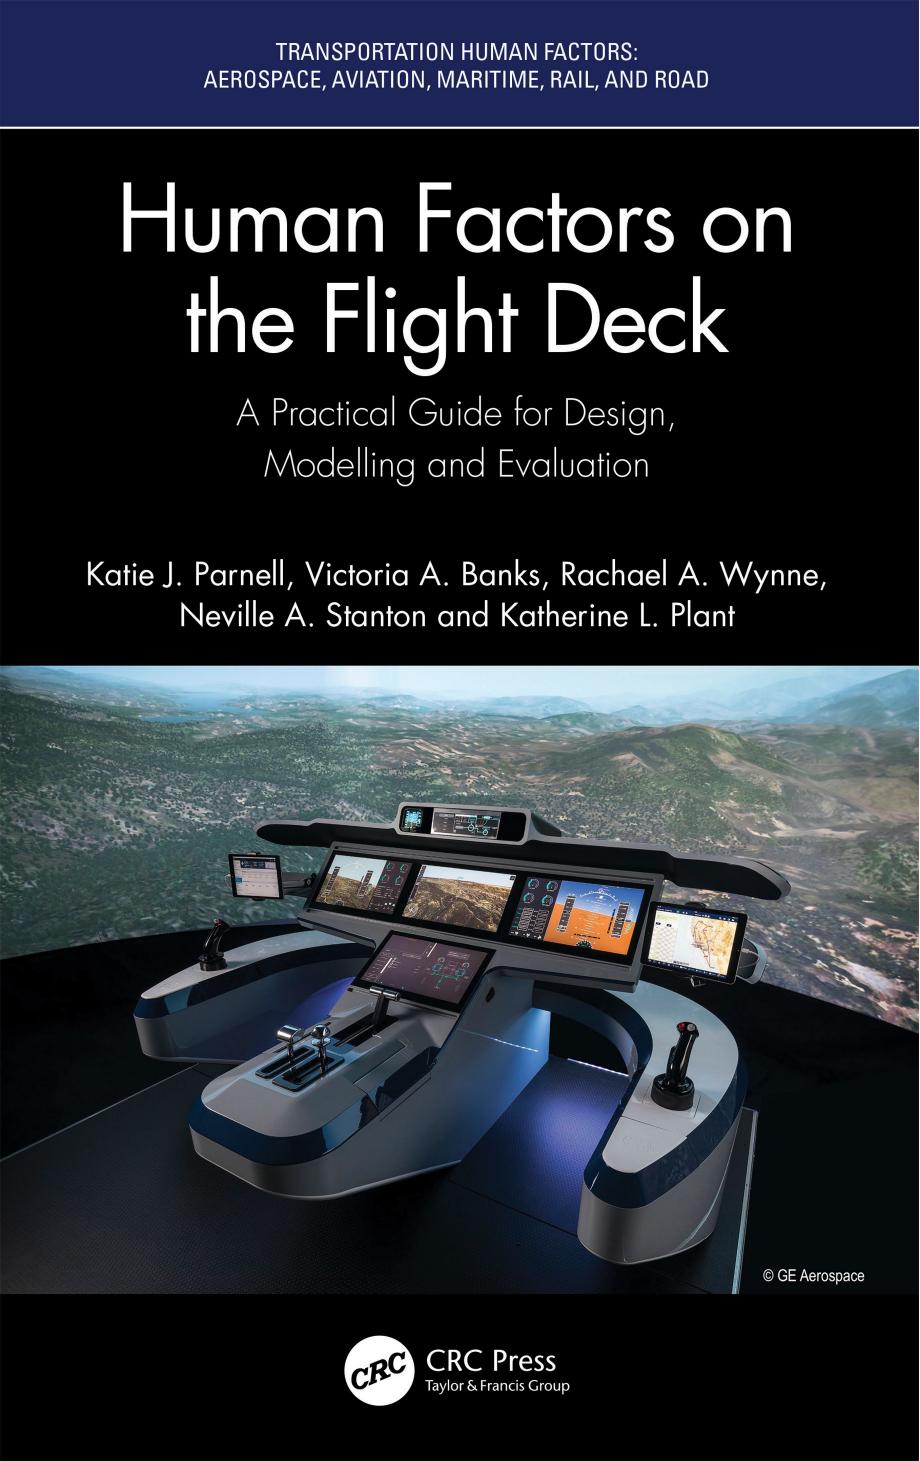 Human Factors on the Flight Deck: A Practical Guide for Design, Modelling and Evaluation by Katie J. Parnell